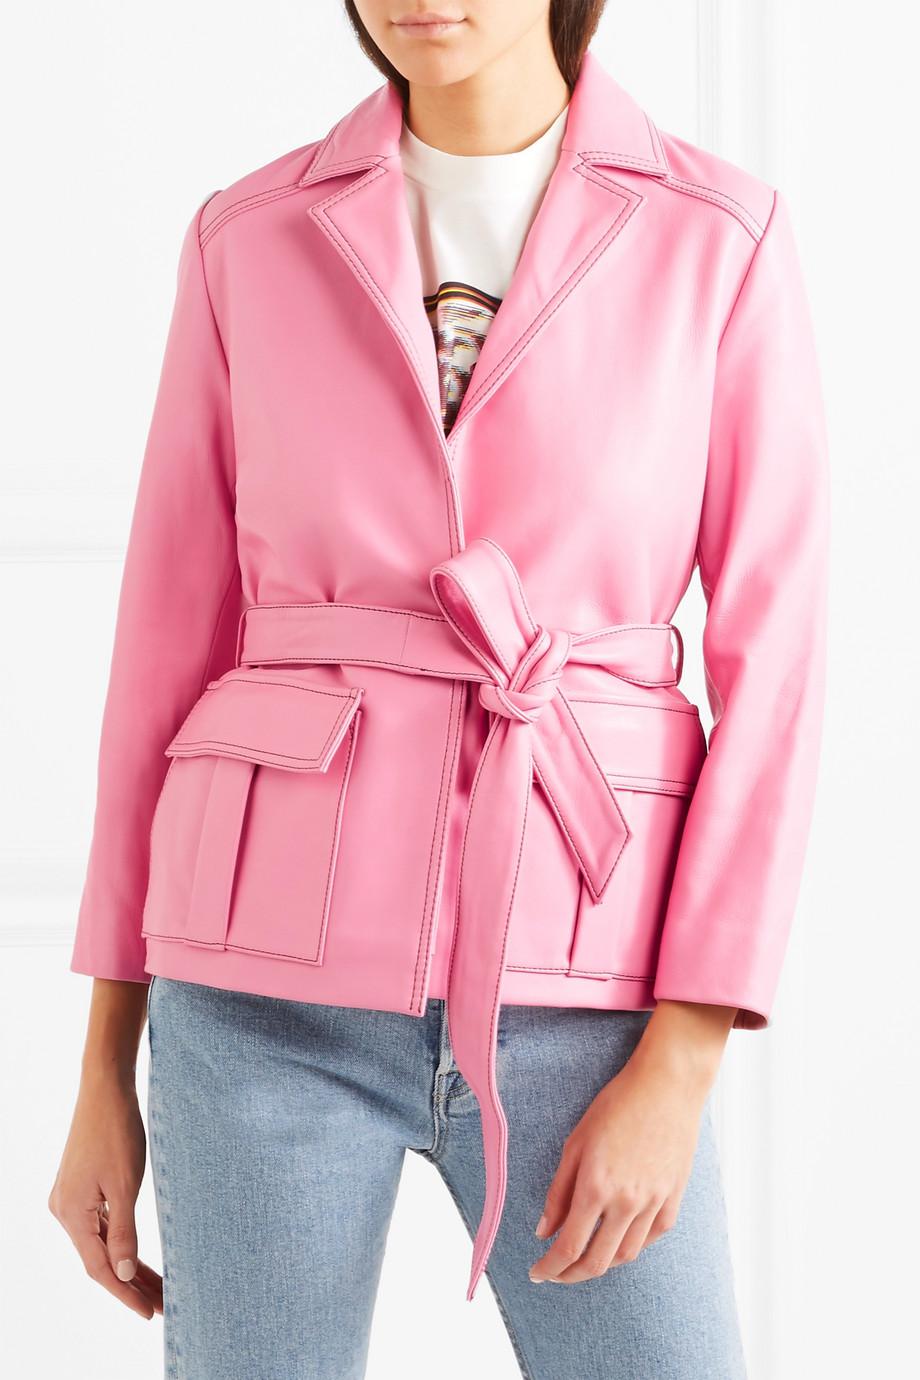 Ganni Passion Leather Jacket in Pink - Lyst